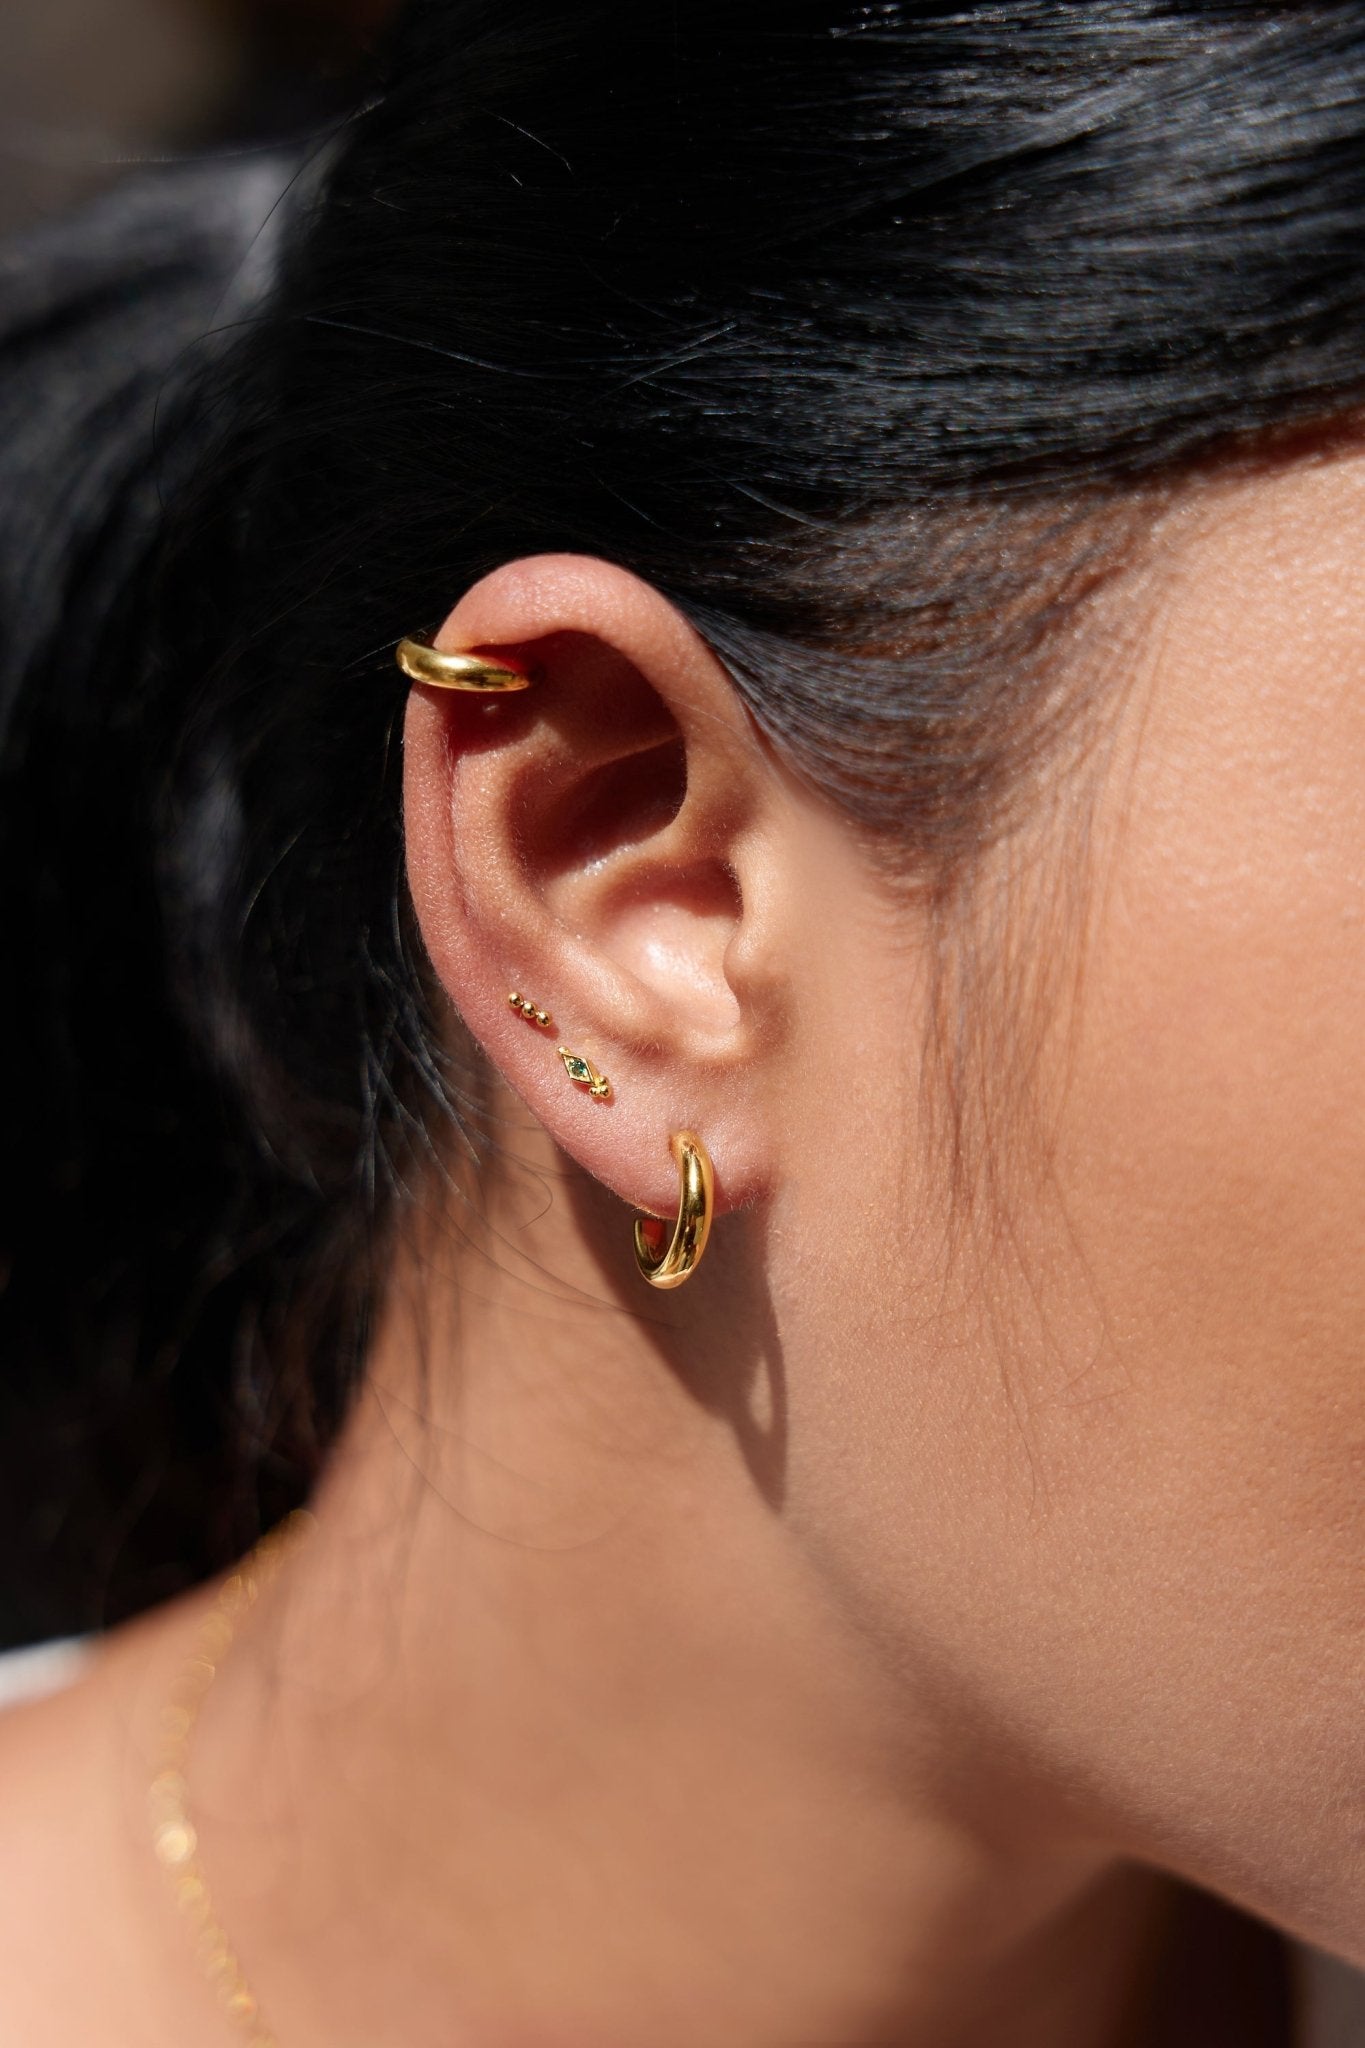 Baby Everyday Gold Hoops - Flaire & Co.